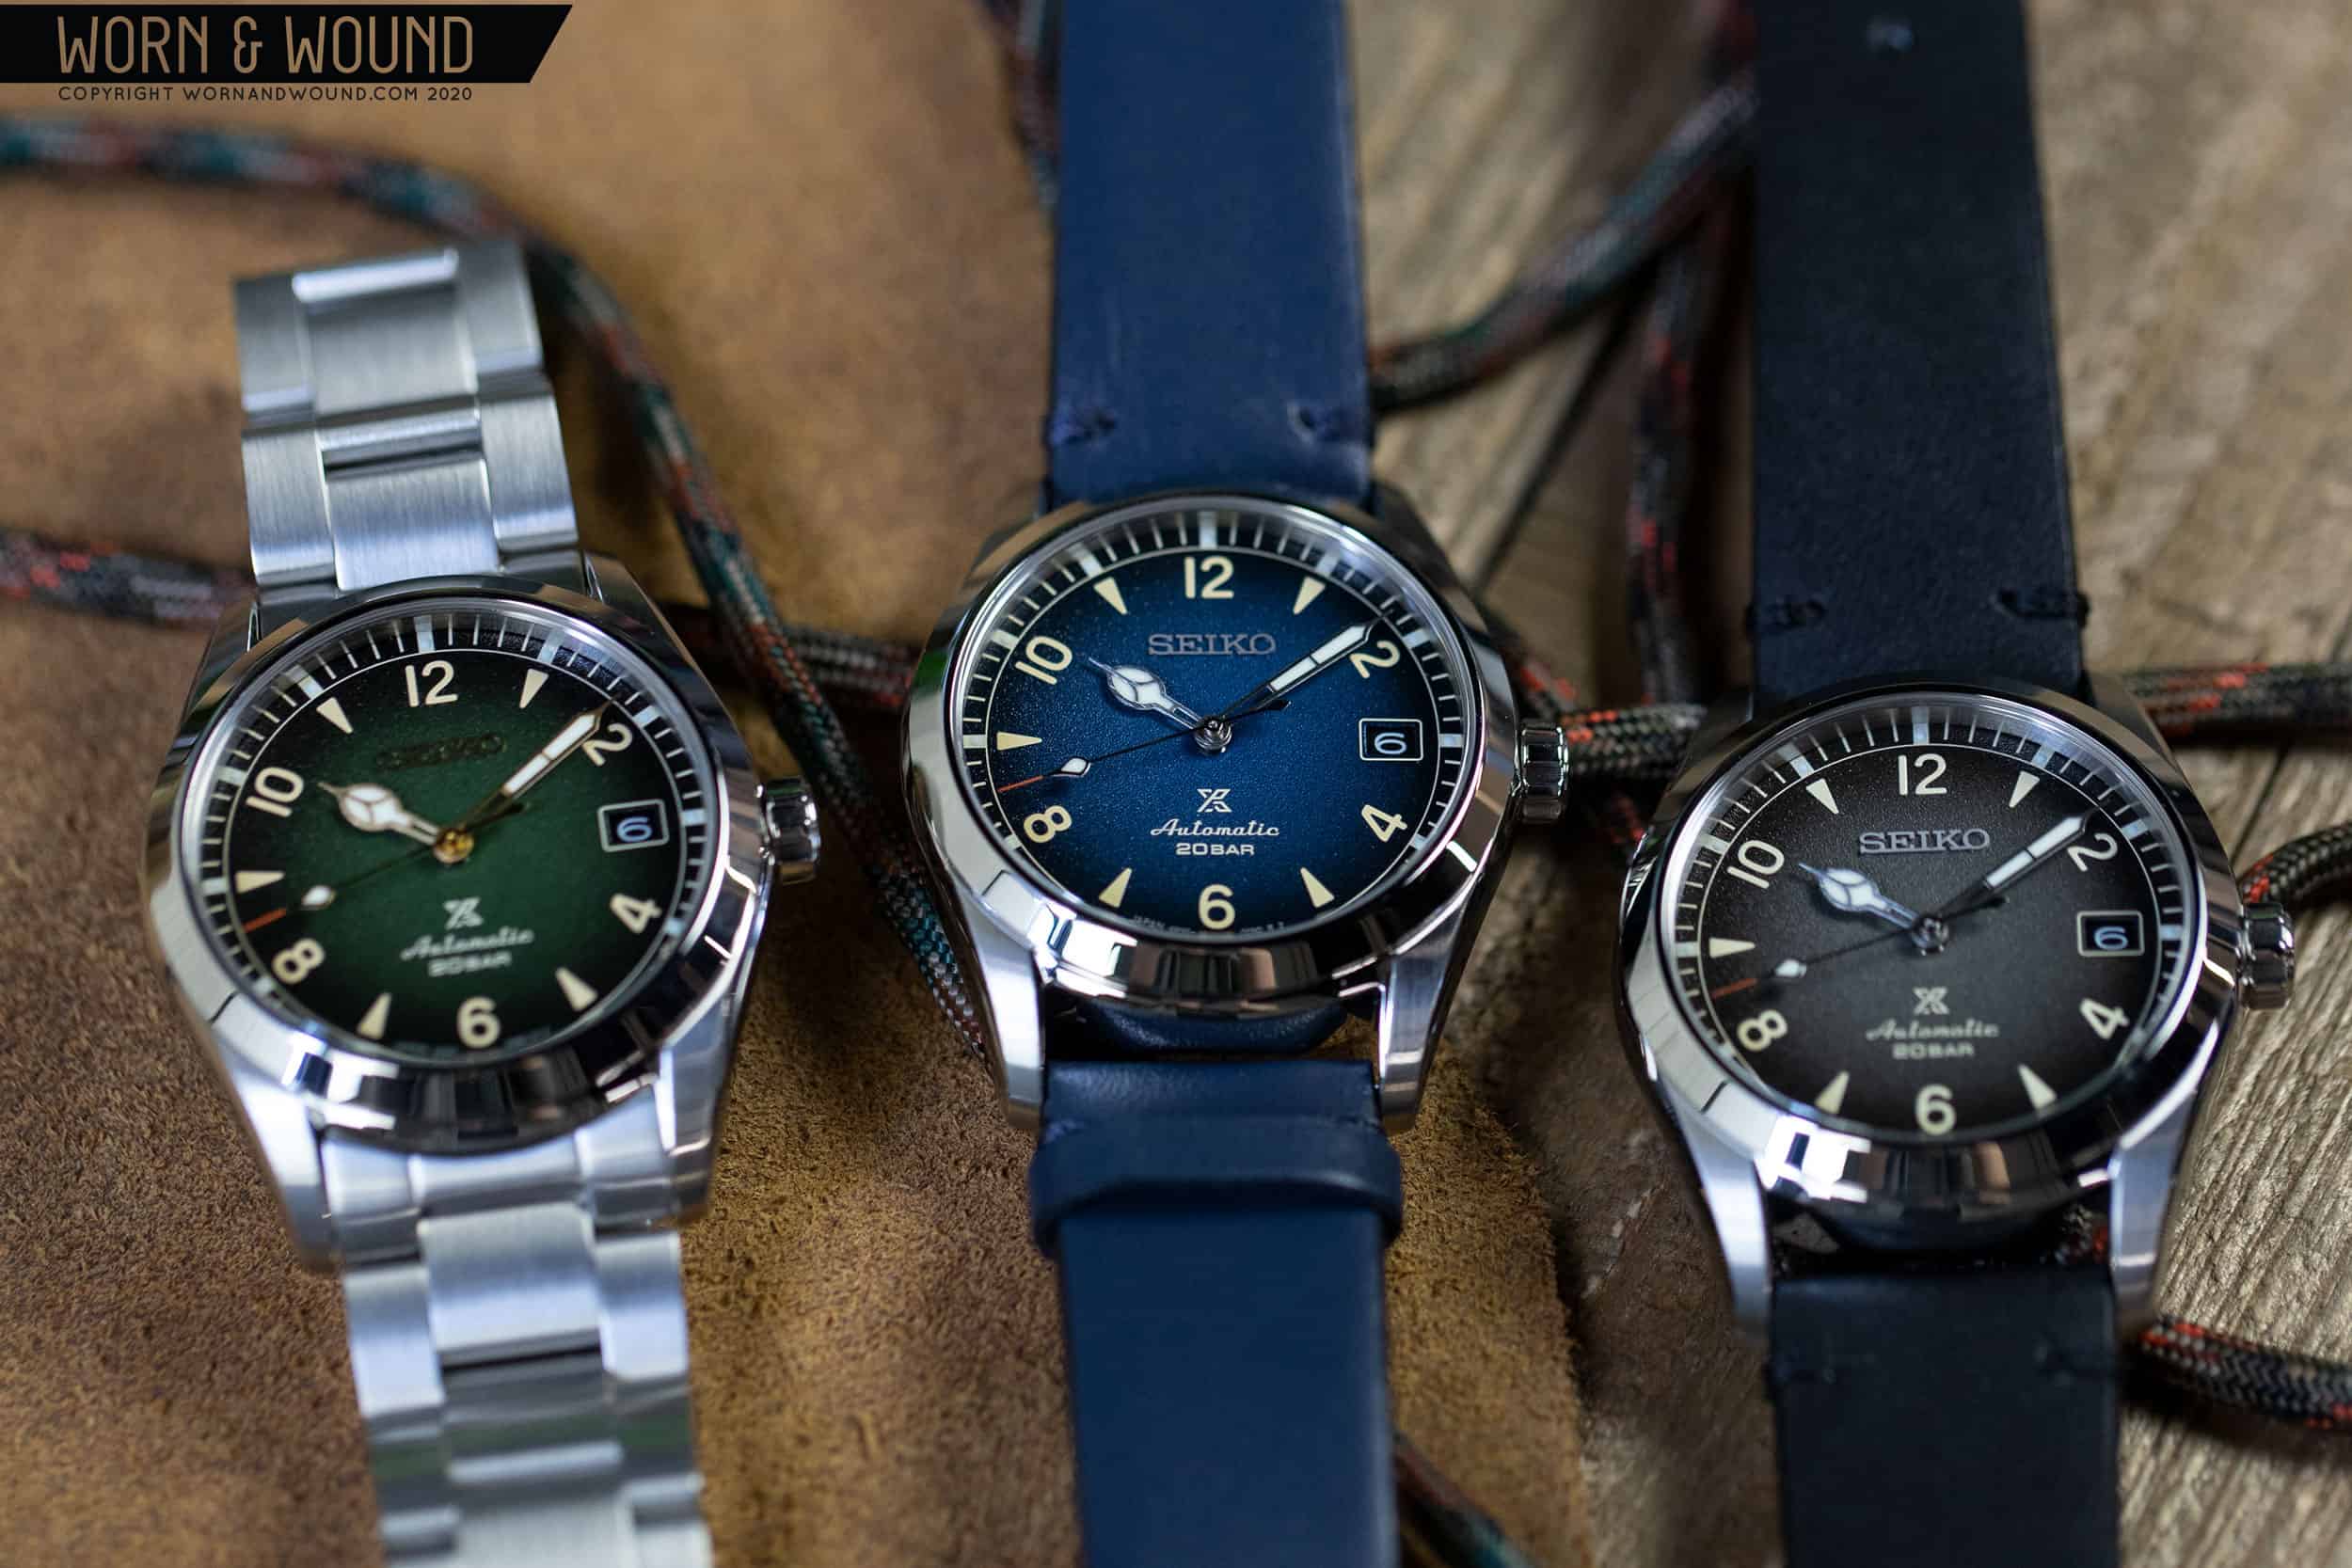 First Look: Seiko Expands their Alpinist Line with a New, Smaller